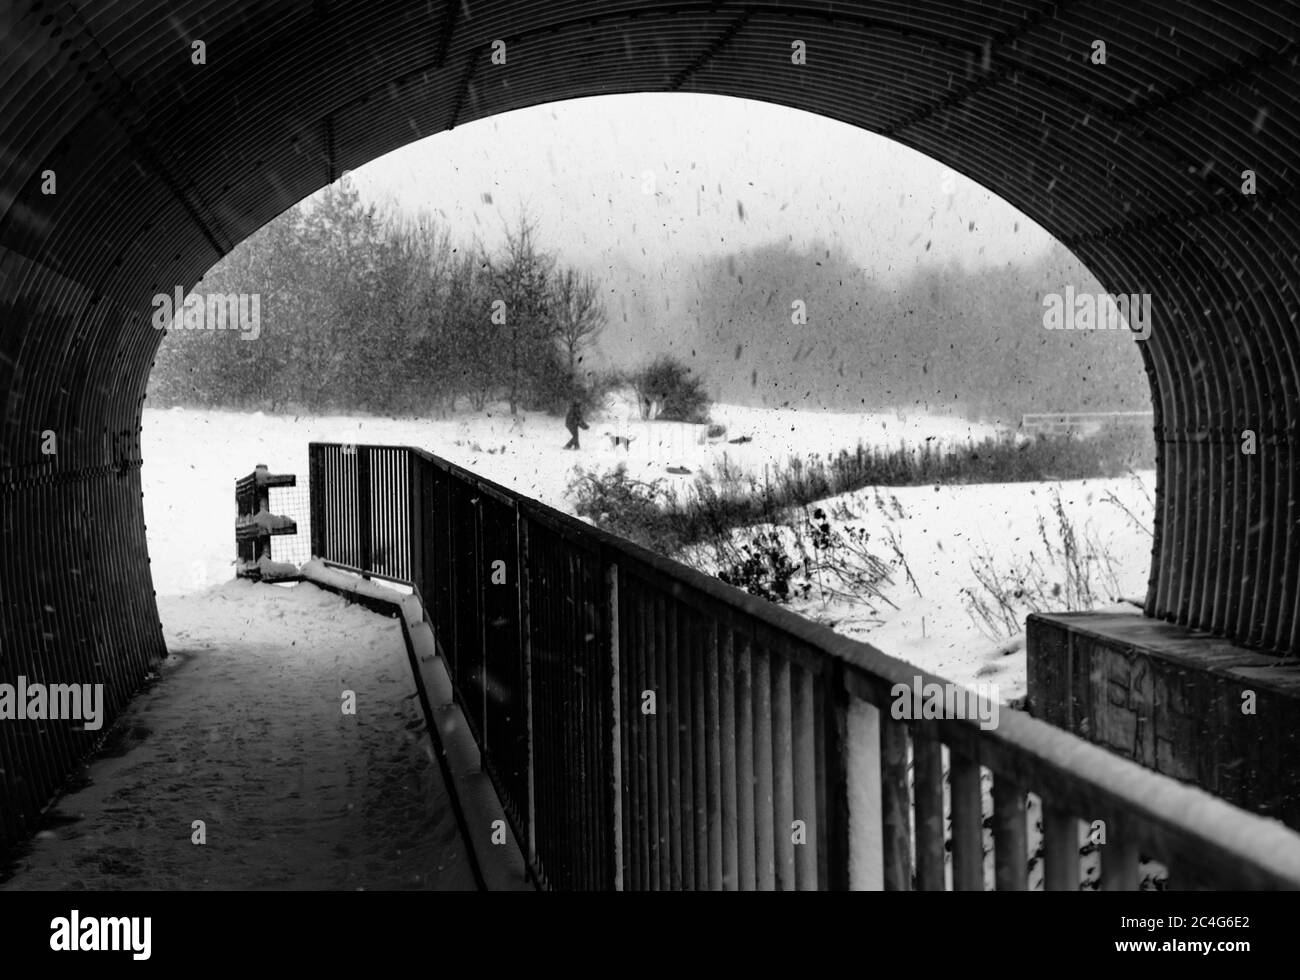 Snowstorm viewed from a pedestrian underpass person and dog playing in the background. Stock Photo